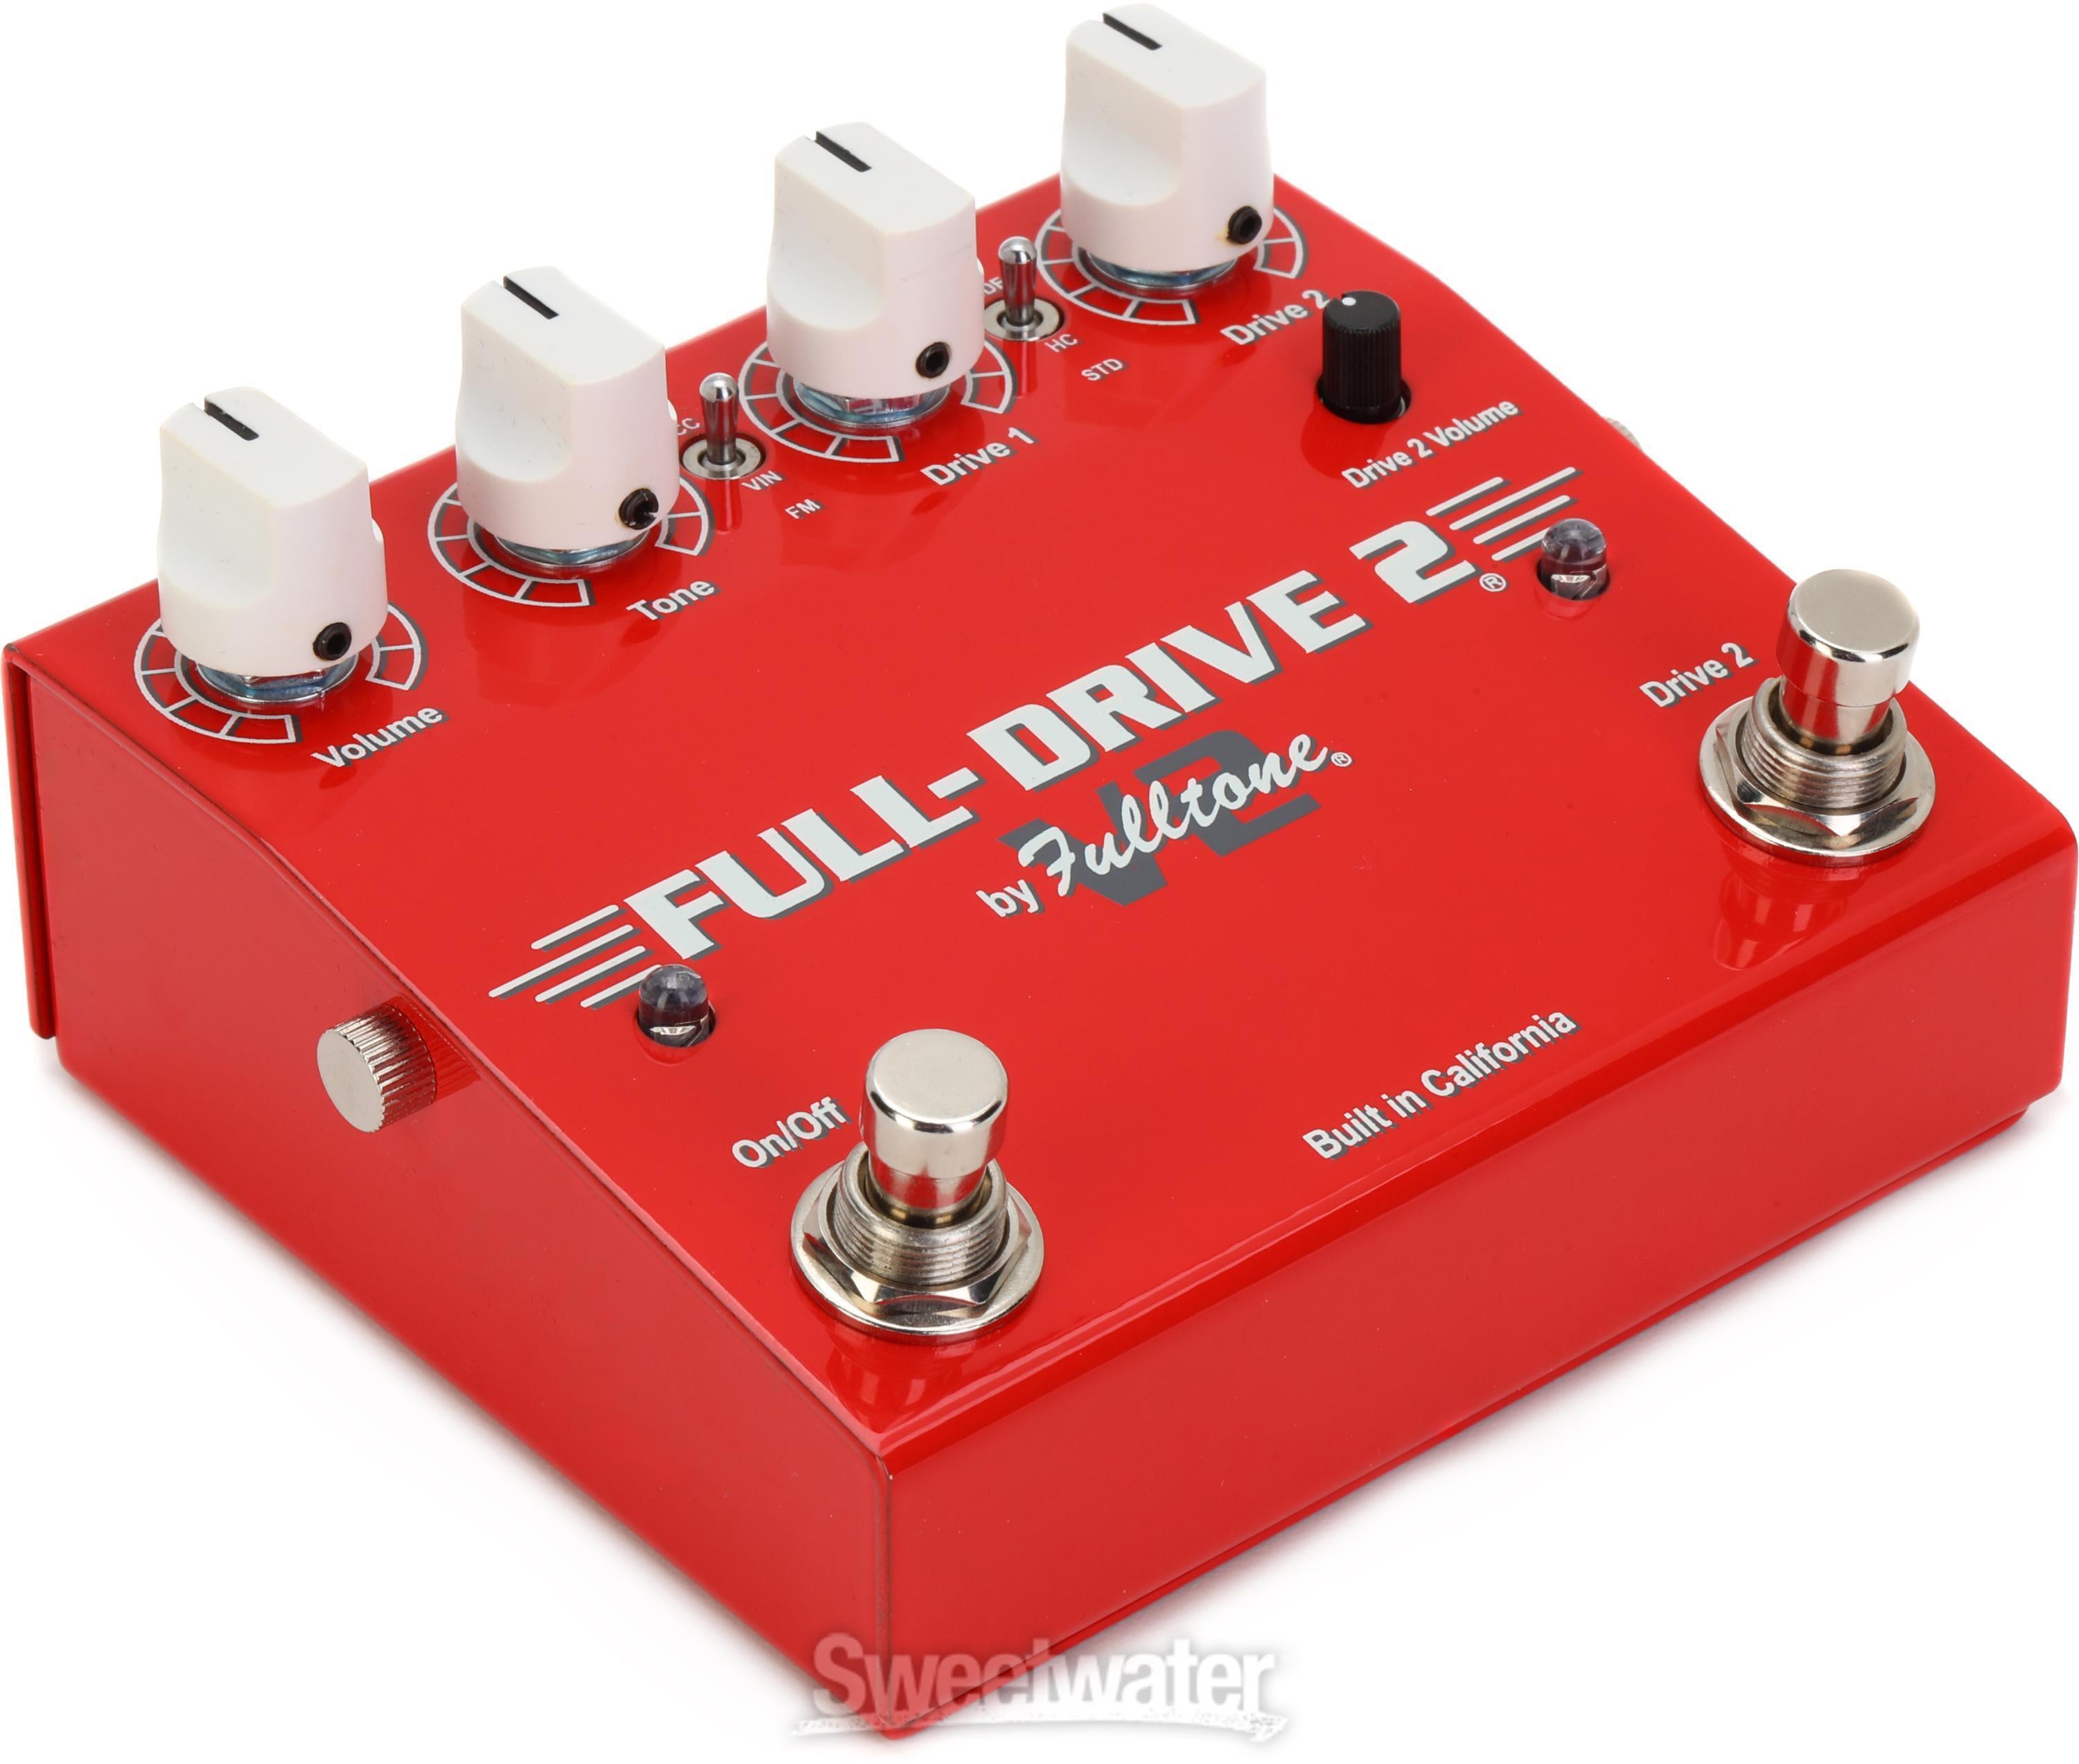 Fulltone Full-Drive 2 V2 Overdrive Pedal with Boost | Sweetwater